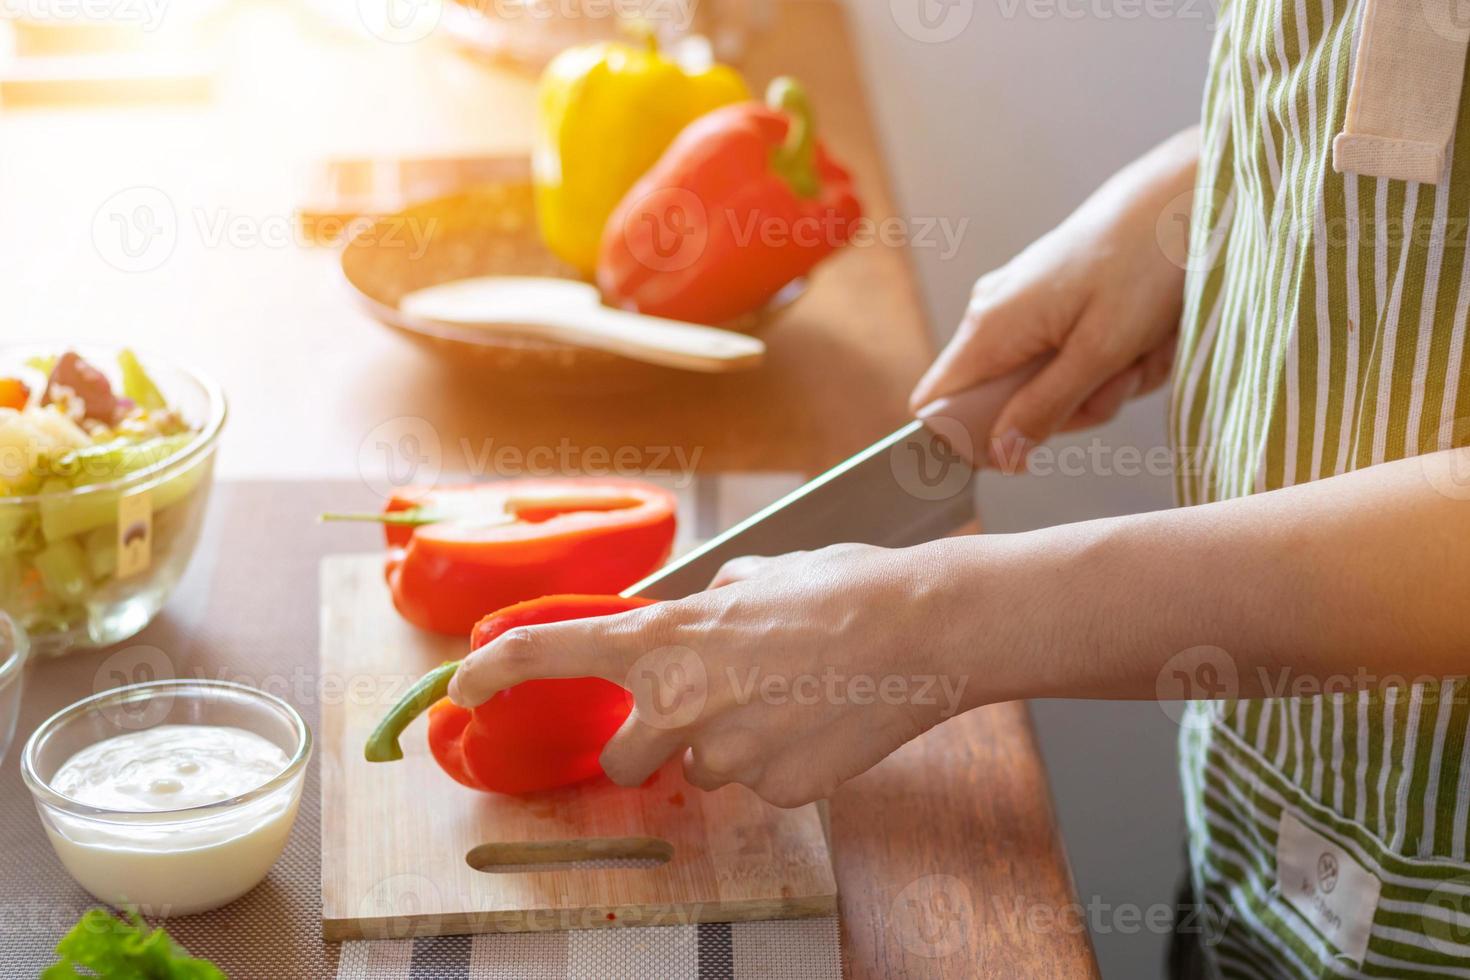 A young woman prepares bell peppers for her breakfast and is ready for a healthy meal on the table with healthy, organic vegetables on the table. healthy food preparation ideas photo